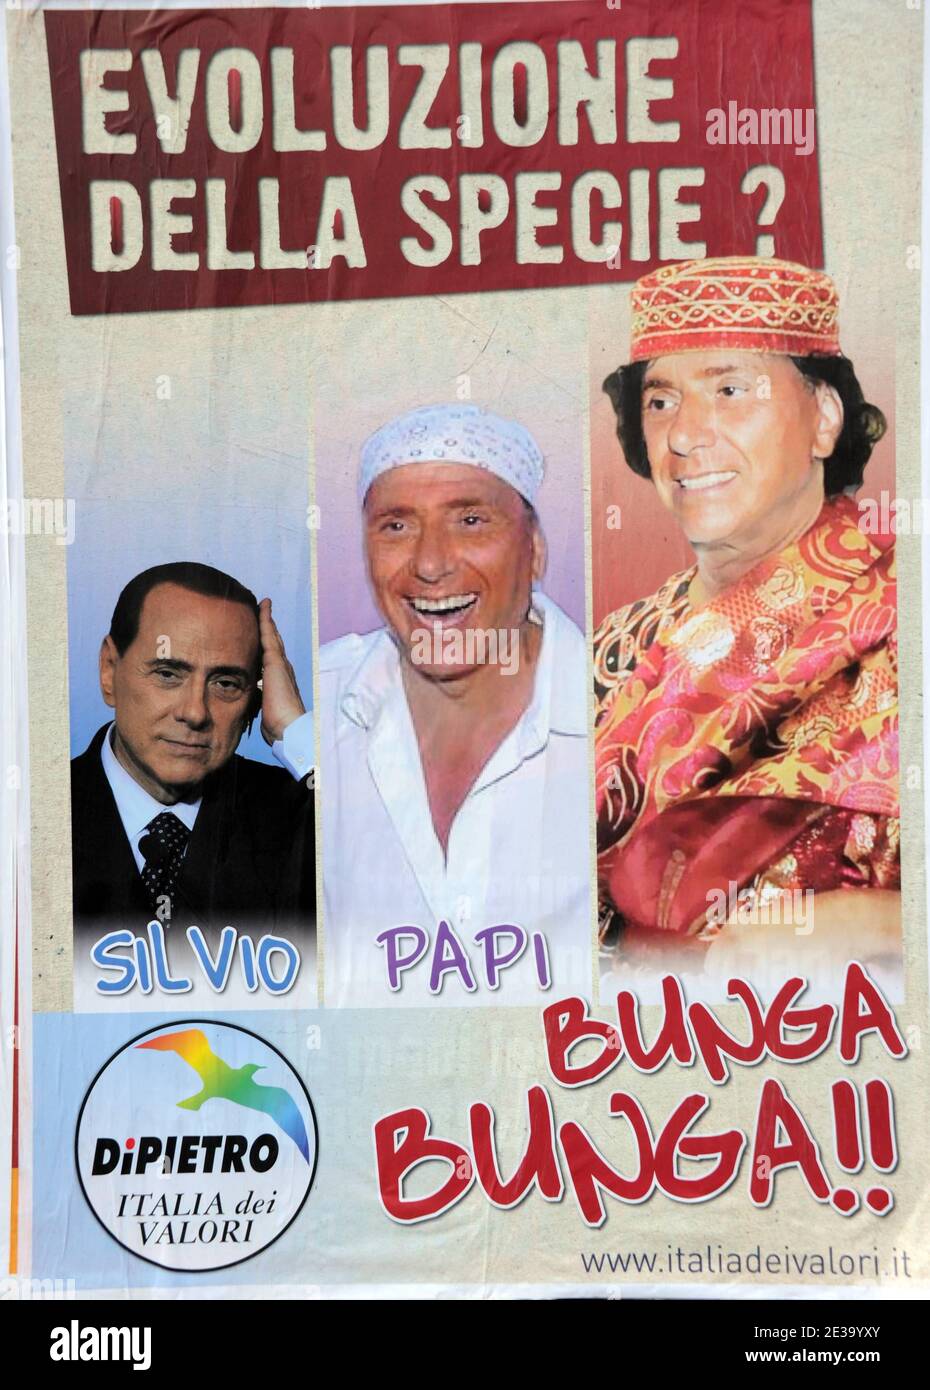 'Hundred of posters showing a ridiculous Silvio Berlusconi are invading in Rome, Italy, on October 30,2010. Writen : ' The evolution of the human race: Silvio, Papi, Bunga Bunga'. A high-profile Silvio Berlusconi political appointment has been drawn into a prostitution investigation involving a teenage Moroccan belly dancer. Prime Minister Silvio Berlusconi said he loved life and women and would not apologise for enjoying himself after new reports of young women and parties were splashed across the front pages. Italian newspapers have reported that a 17 year-old Moroccan girl, Karima El Mahrou Stock Photo